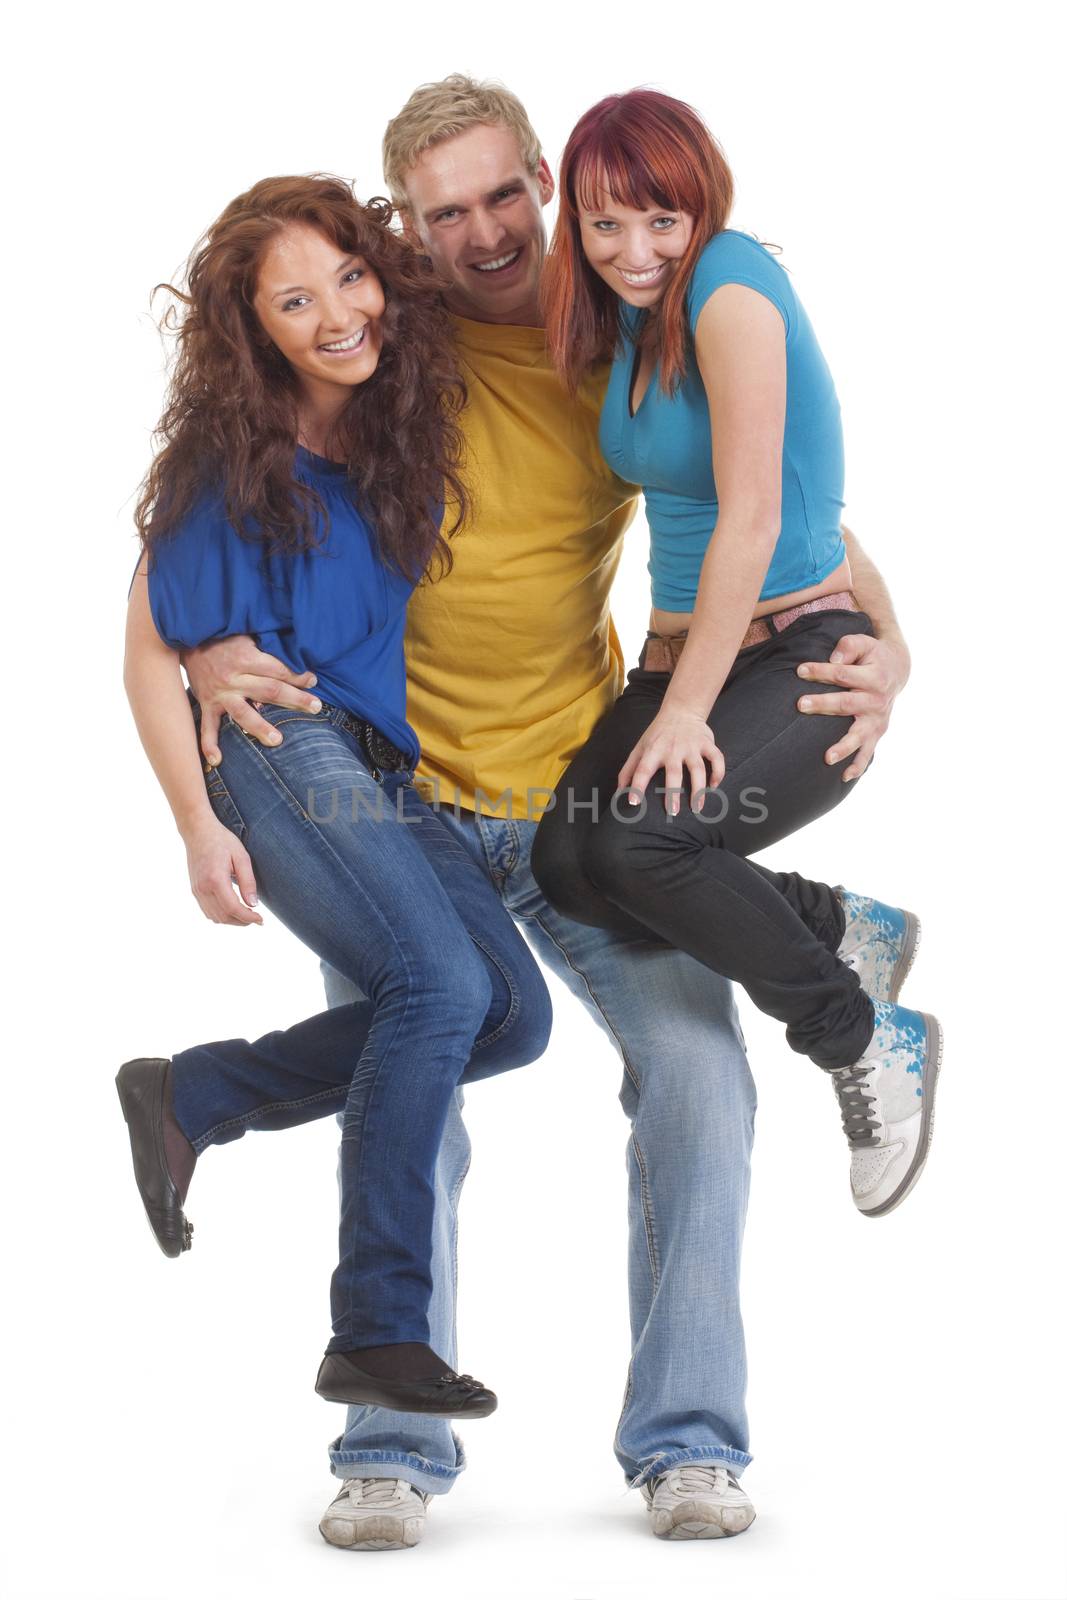 portrait of a group of young happy people smiling - isolated on white